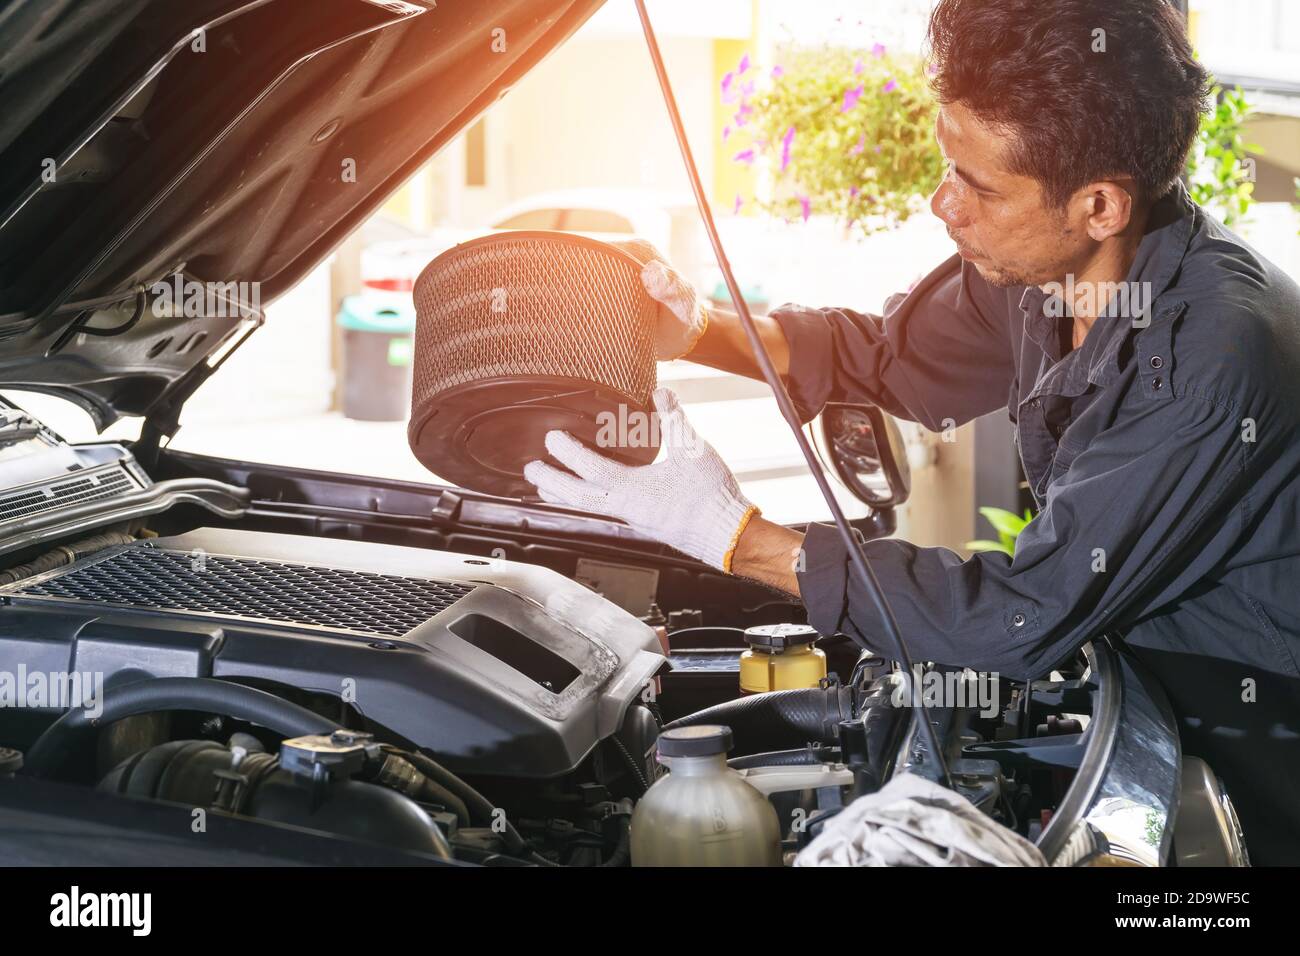 The technician removes the car's air filter for inspection and cleaning, Automotive industry and garage concepts. Stock Photo